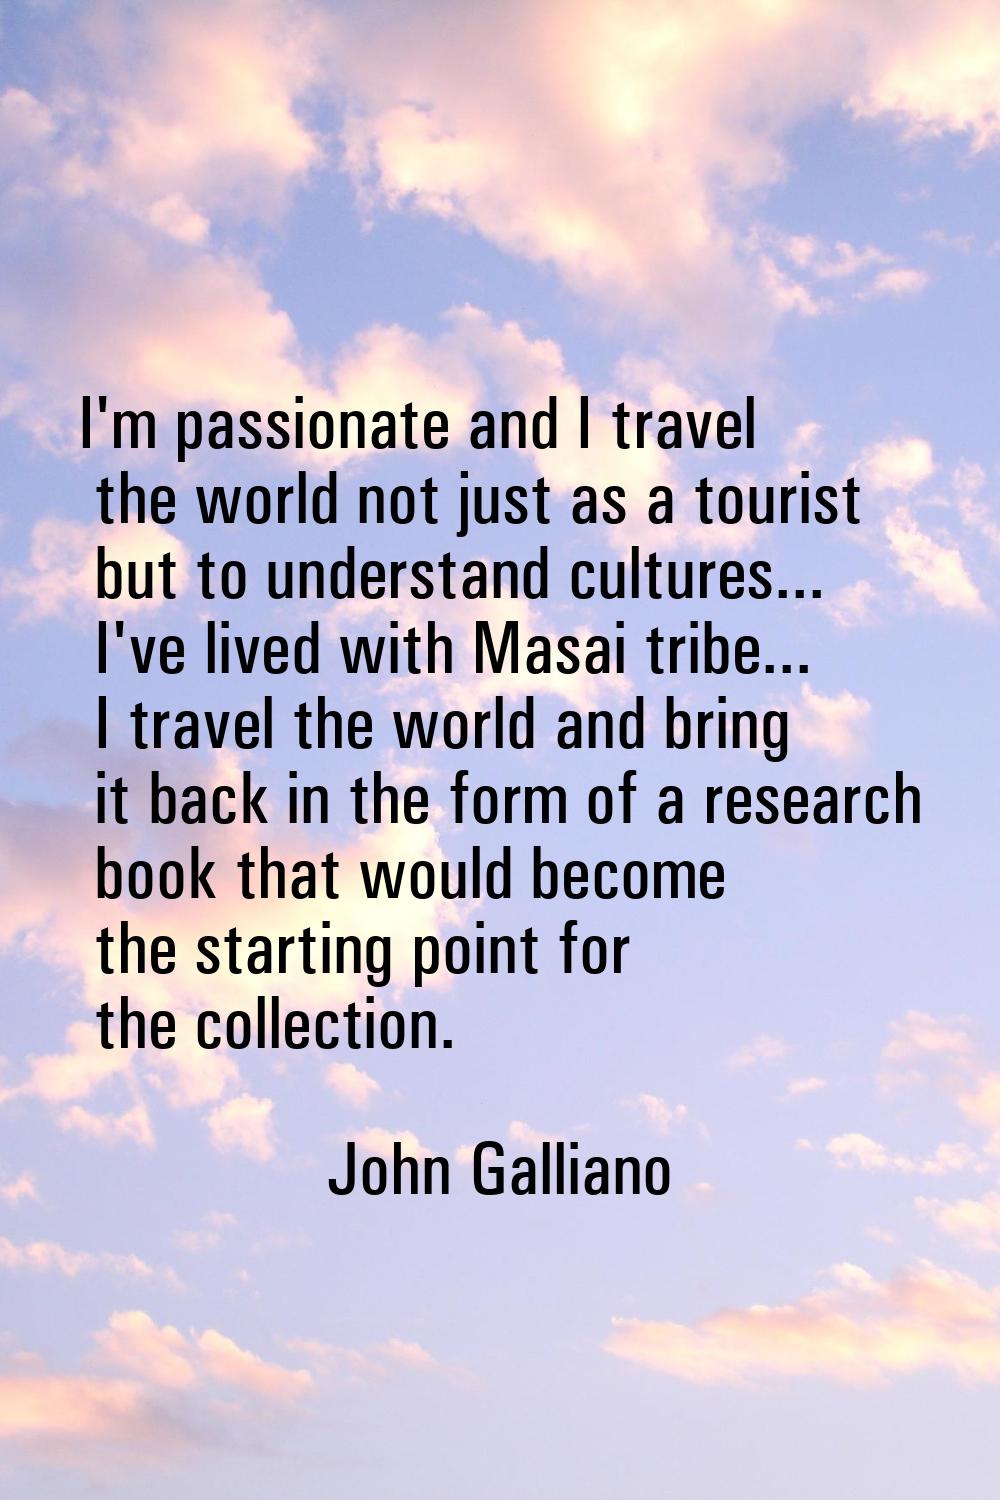 I'm passionate and I travel the world not just as a tourist but to understand cultures... I've live